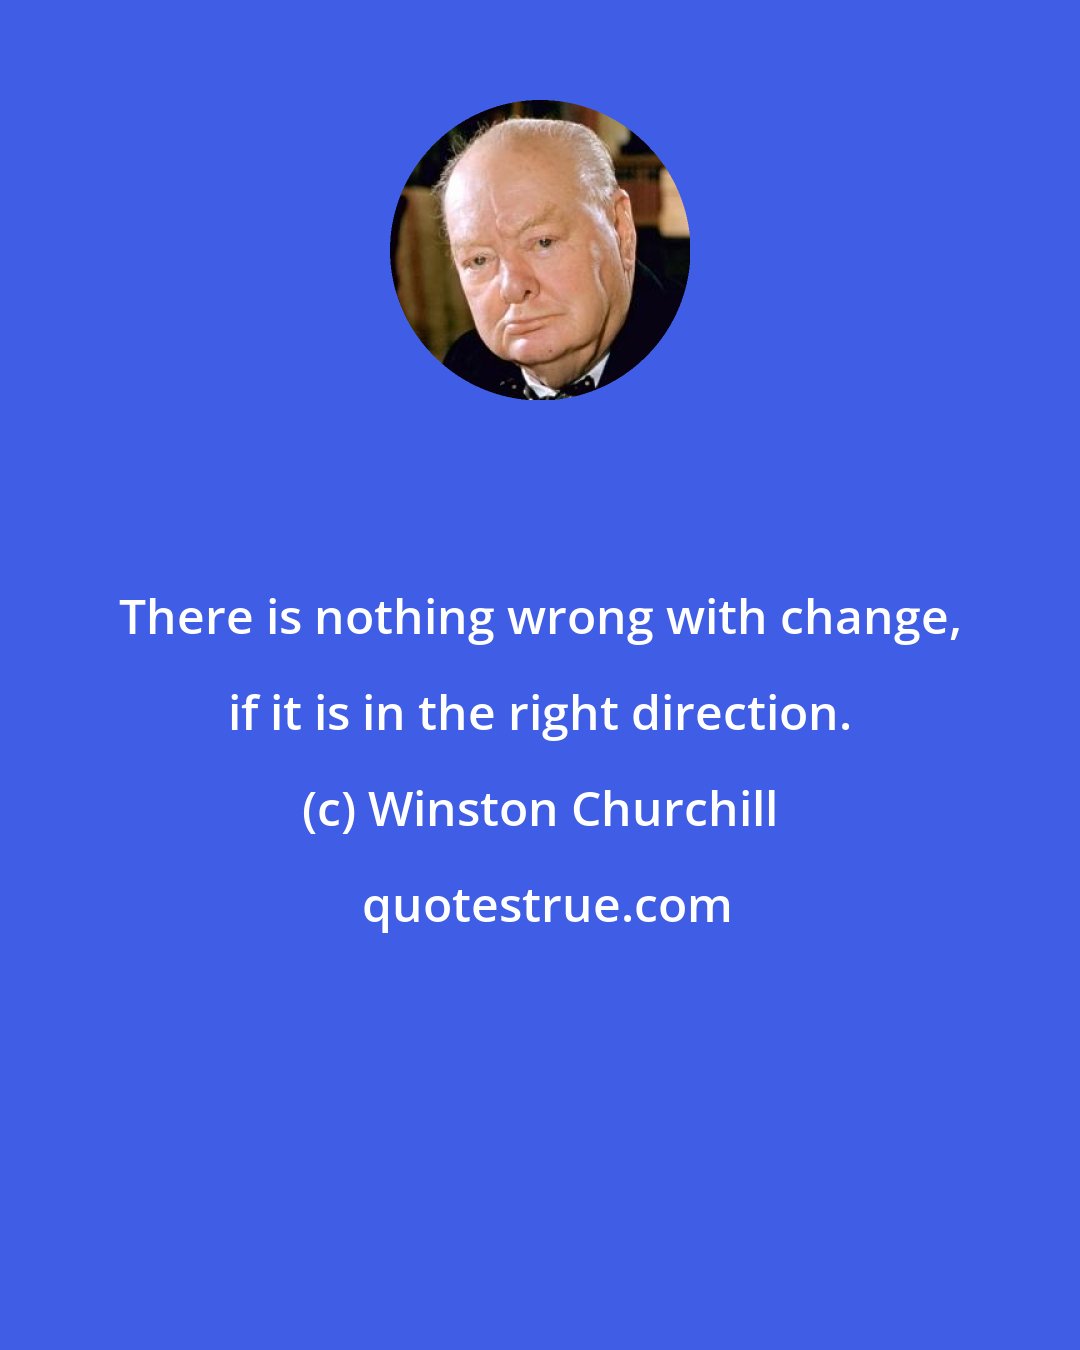 Winston Churchill: There is nothing wrong with change, if it is in the right direction.